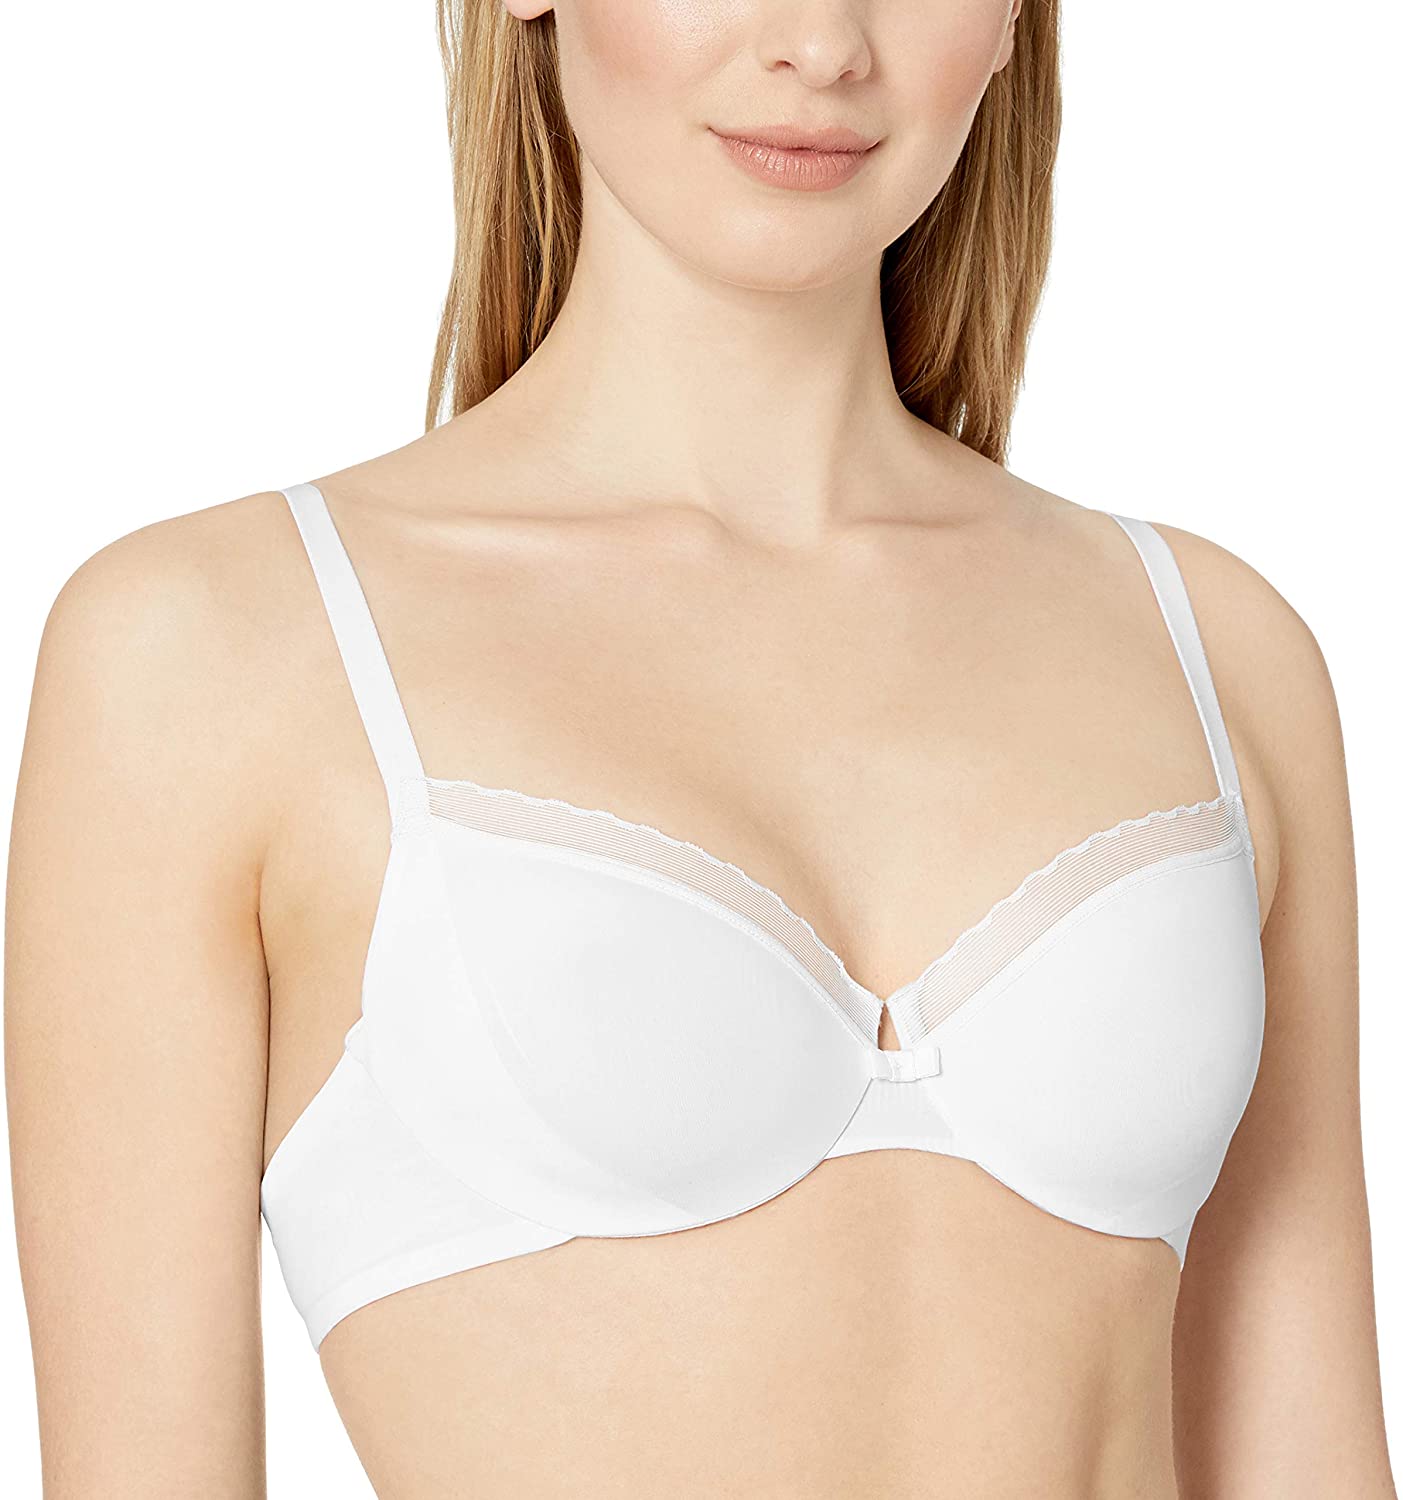 https://kasastyle.com/cdn/shop/products/hanes_20ultimate_20womens_20silky_20smooth_20unlined_20underwire_20bra_20hu30_20white_2001.jpg?v=1640730675